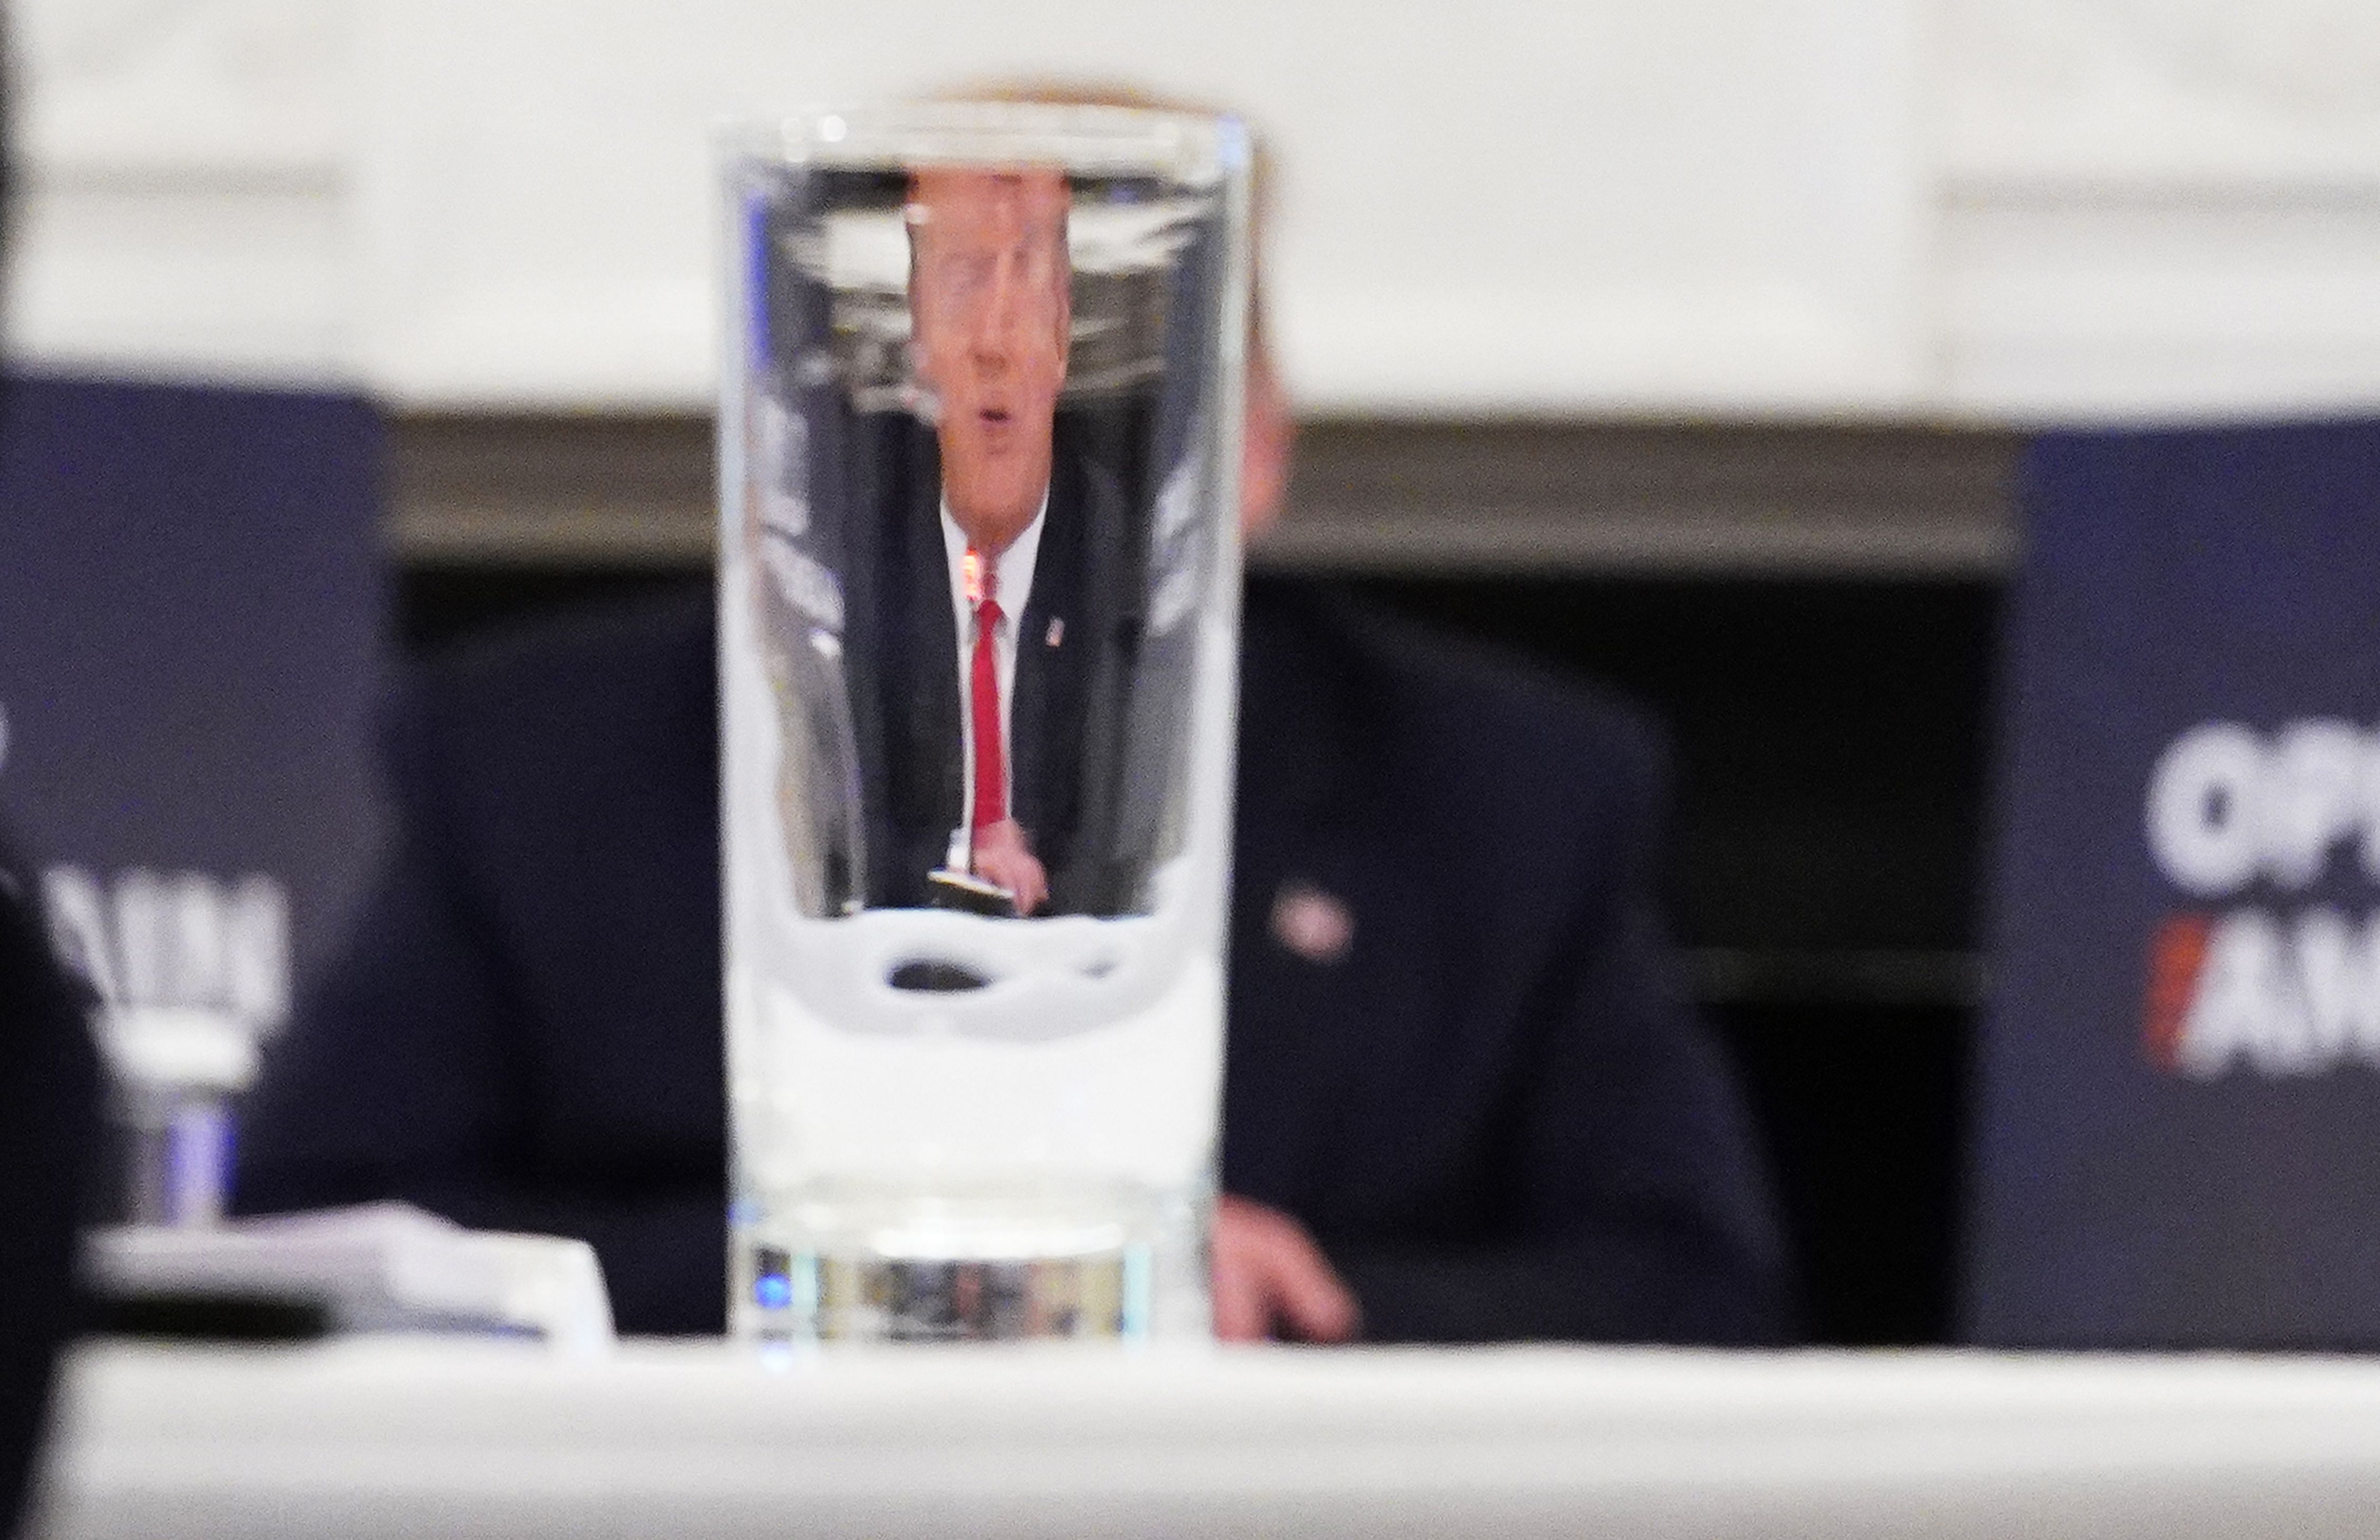 US President Donald Trump is seen through a drinking glass. (AFP Photo)